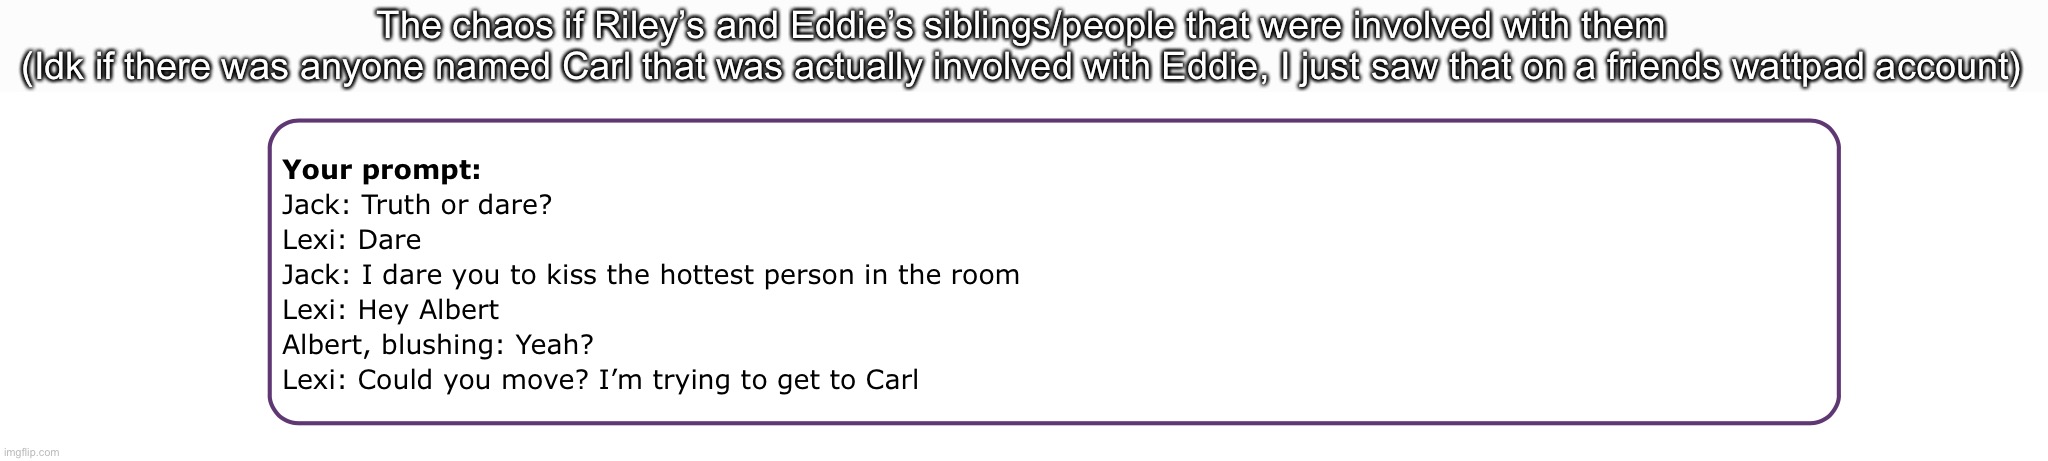 The chaos if Riley’s and Eddie’s siblings/people that were involved with them
(Idk if there was anyone named Carl that was actually involved with Eddie, I just saw that on a friends wattpad account) | made w/ Imgflip meme maker